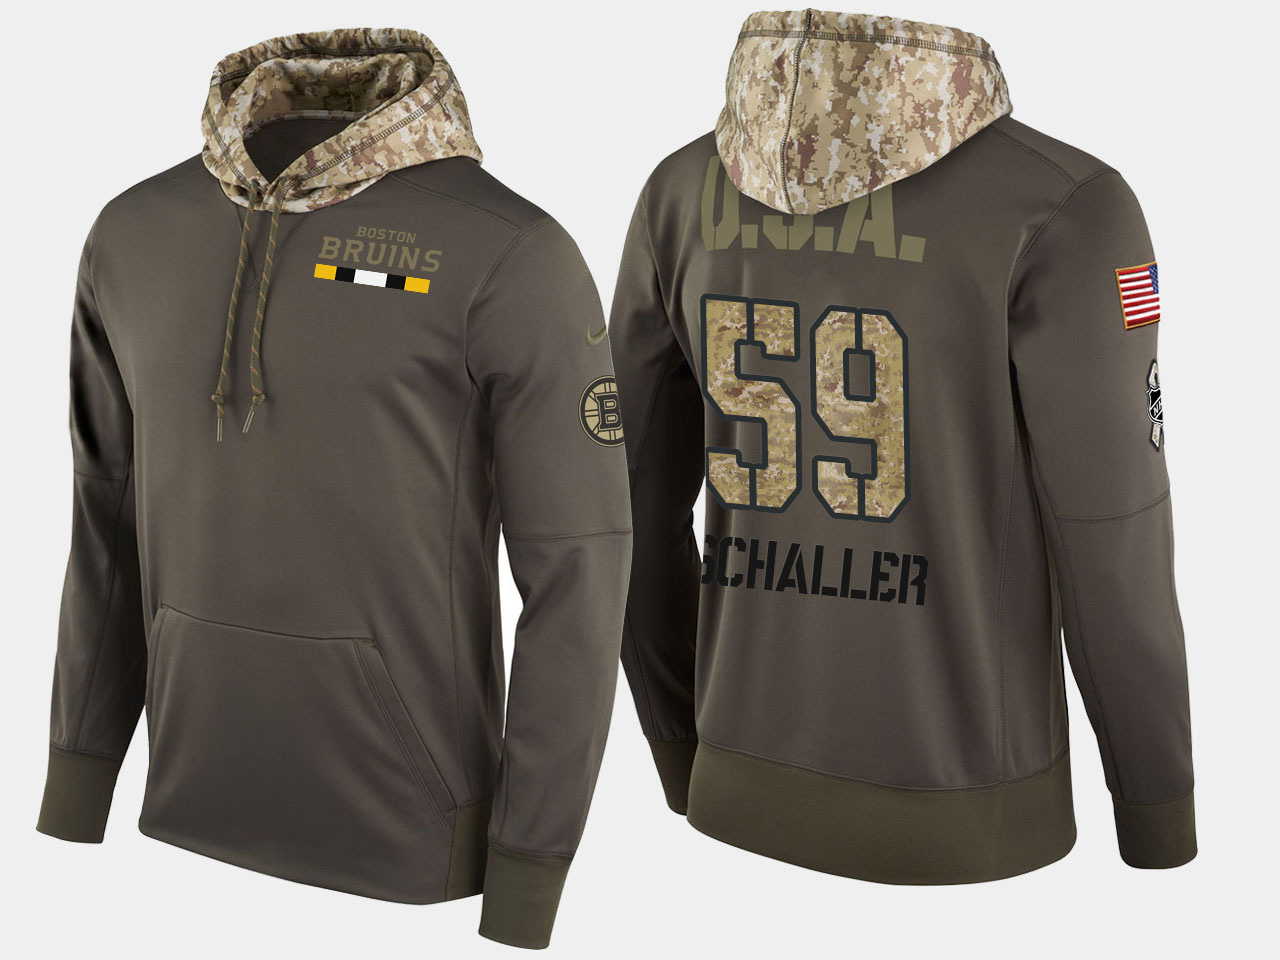 Nike Bruins 59 Tim Schaller Olive Salute To Service Pullover Hoodie